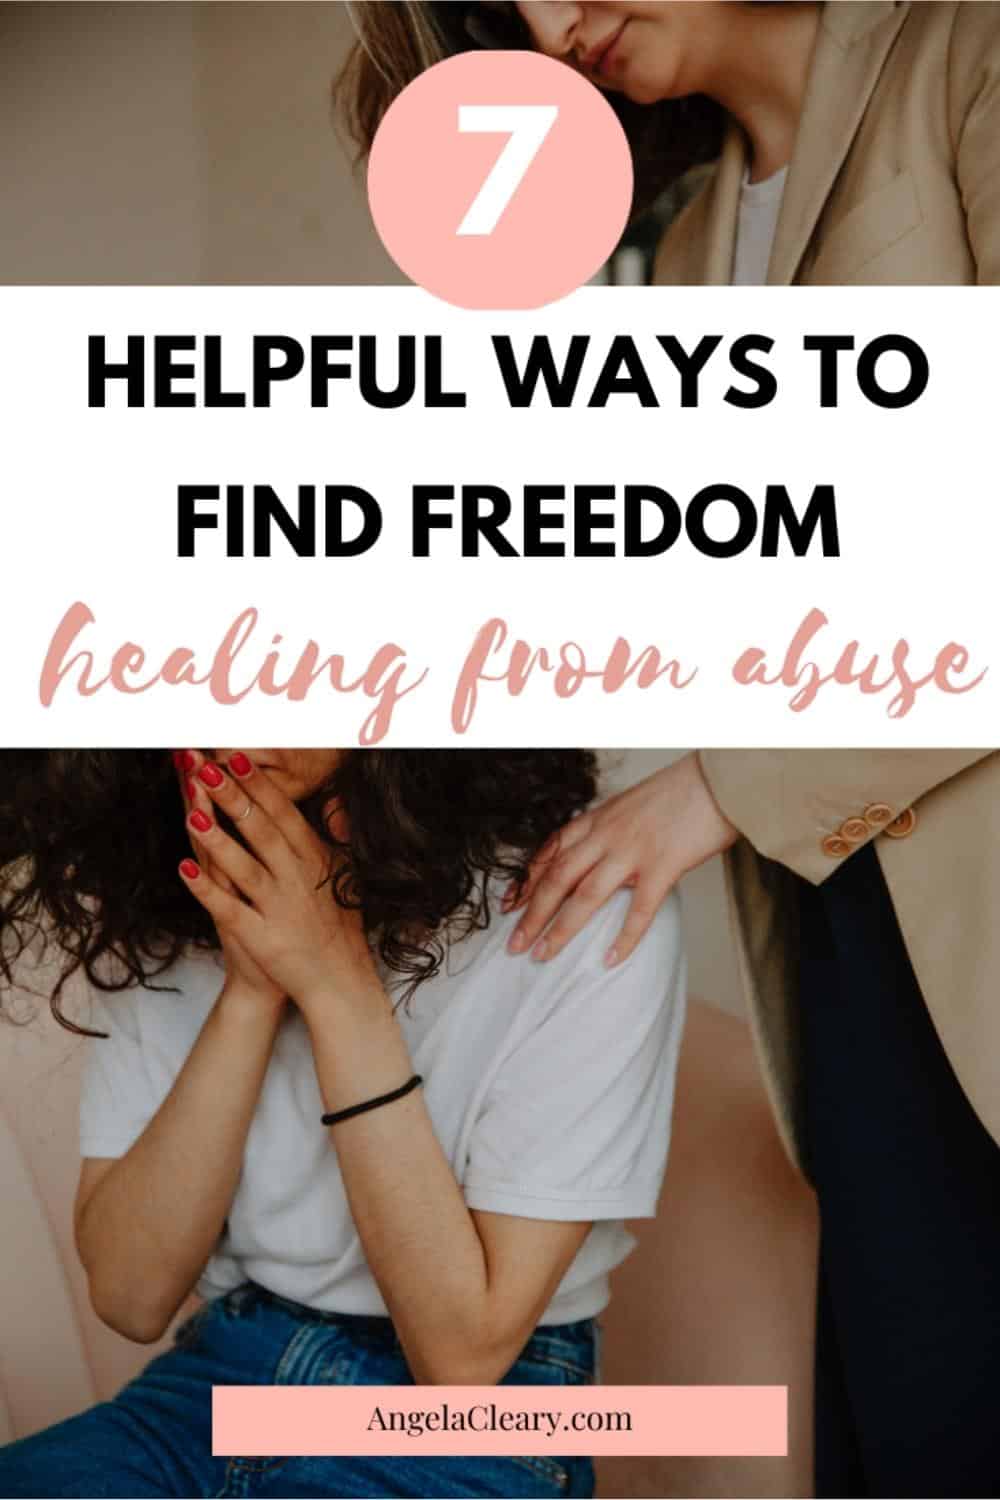 Healing From Abuse: 7 Helpful Ways To Find Freedom